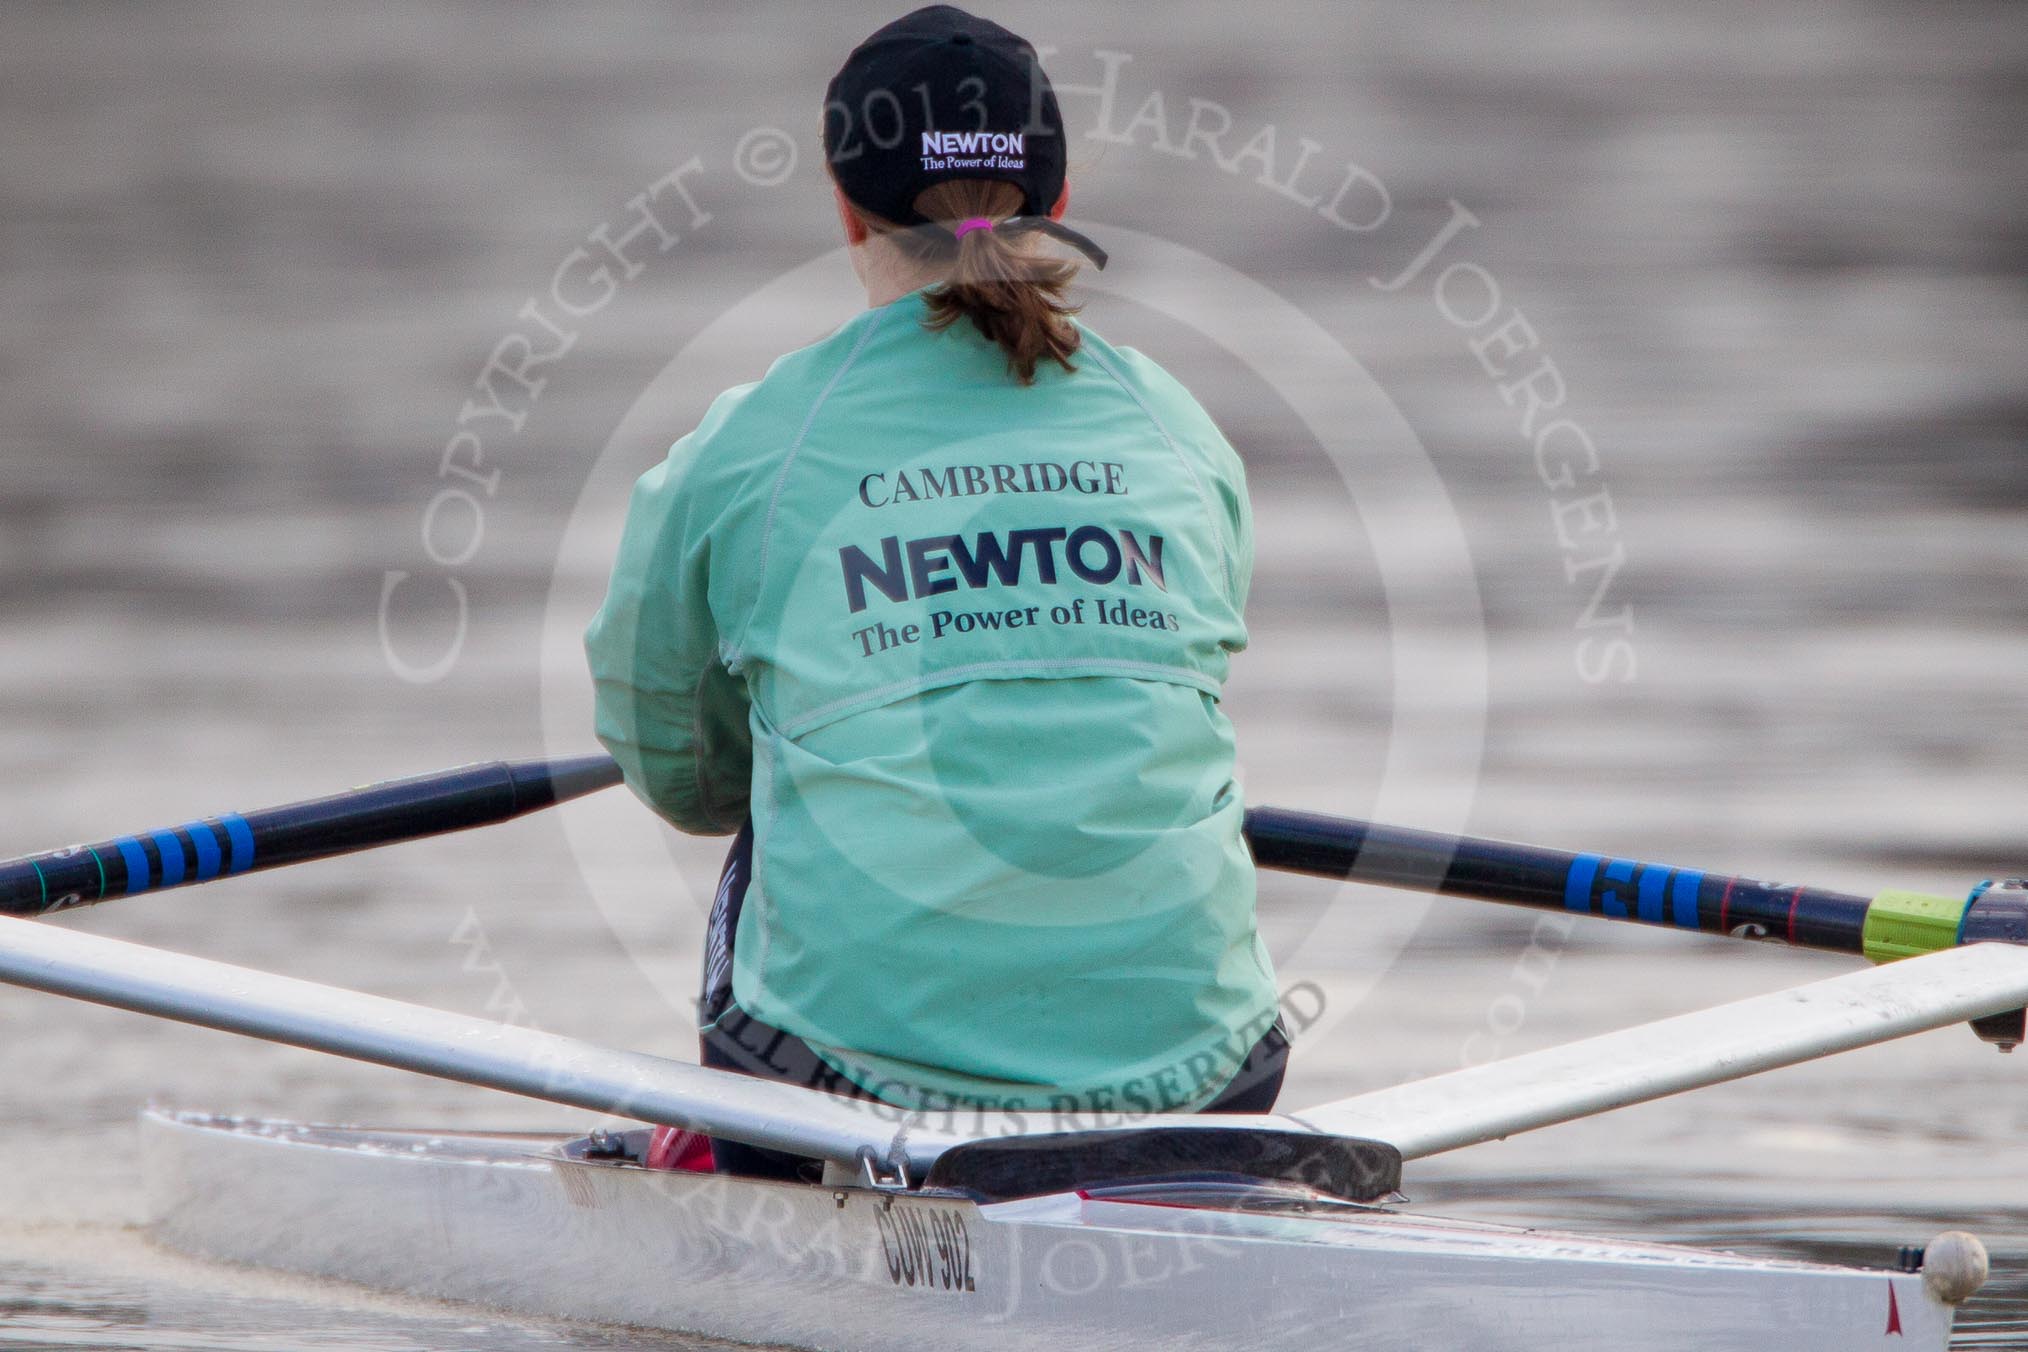 The Boat Race season 2013 - CUWBC training: Lizzy Johnstone, CUWBC substitute, rowing ahead of the three Cambridge boats..
River Thames near Remenham,
Henley-on-Thames,
Oxfordshire,
United Kingdom,
on 19 March 2013 at 15:29, image #15